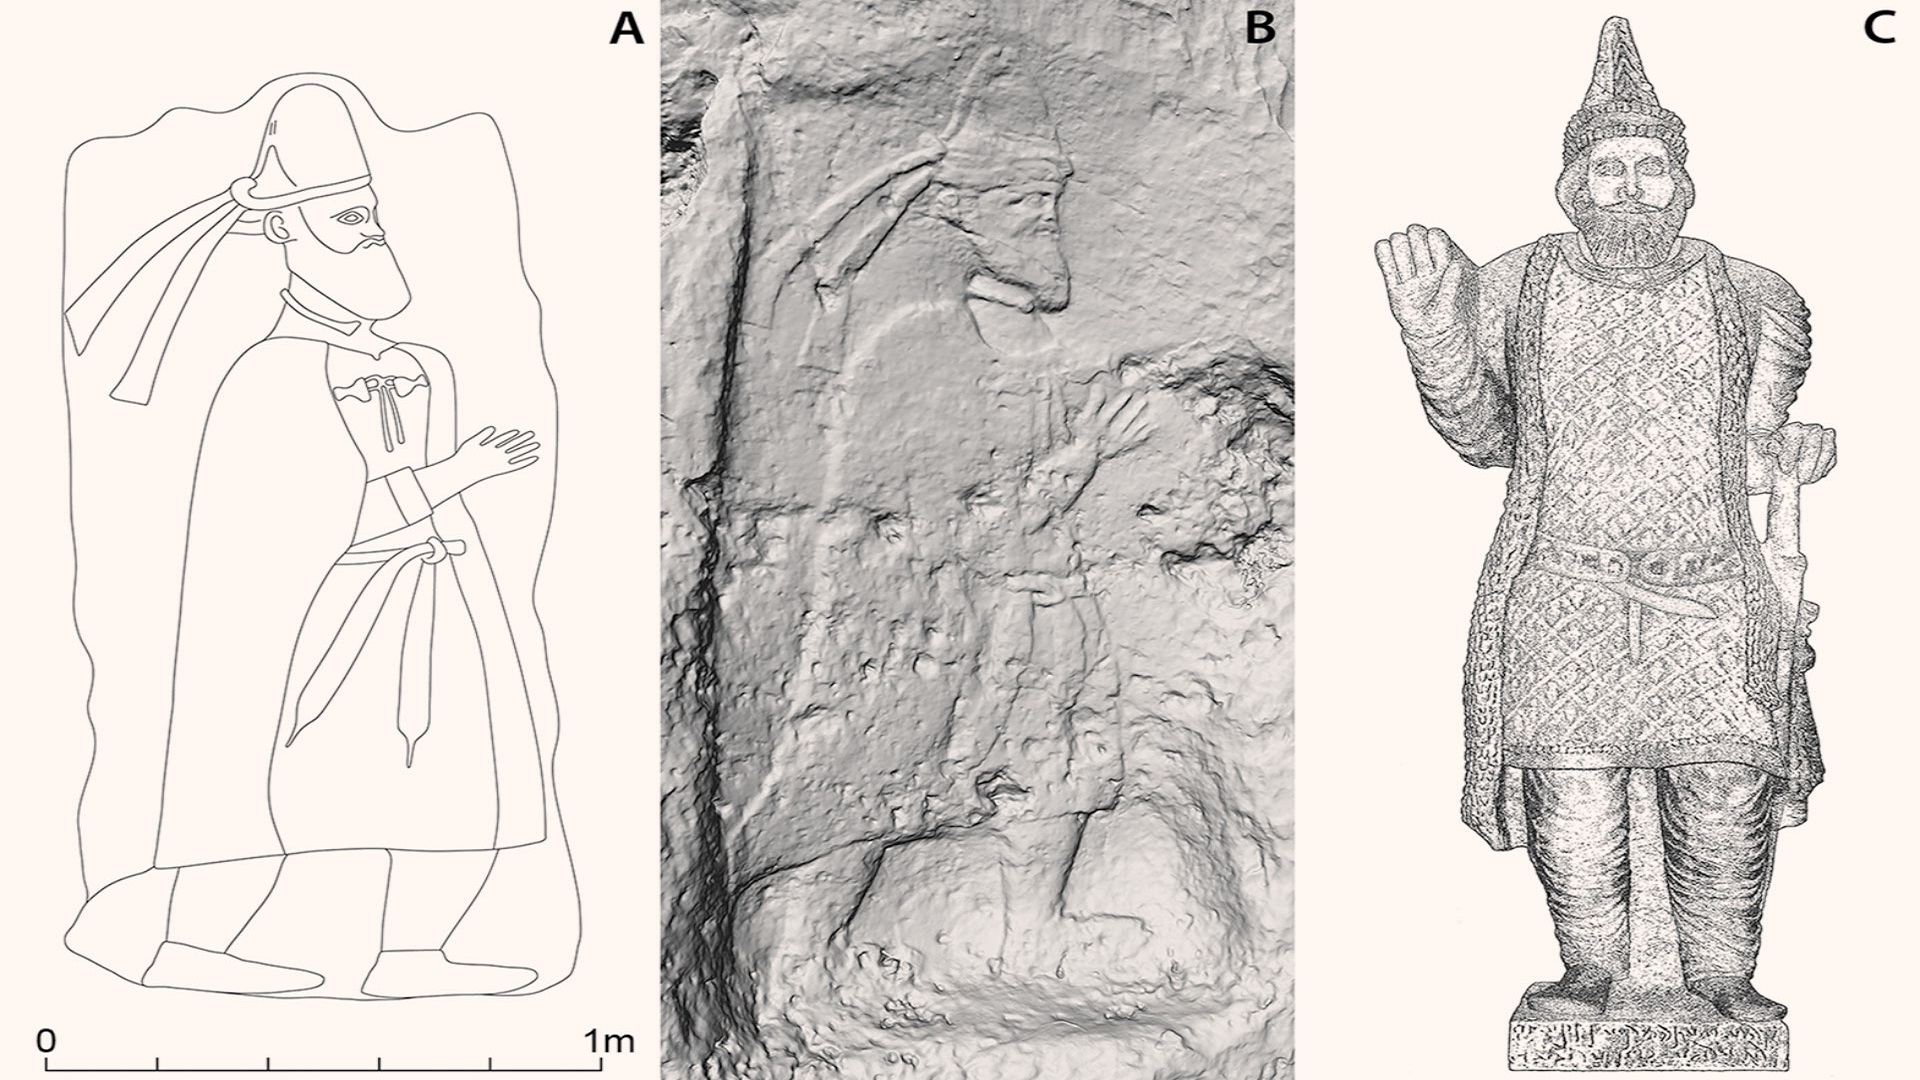 Merquly rock-relief (A), Rabana rock-relief (B), the statue from Hatra of King ’tlw/Attalos of Adiabene (C). Image credit: Michael Brown / Rabana-Merquly Archaeological Project.